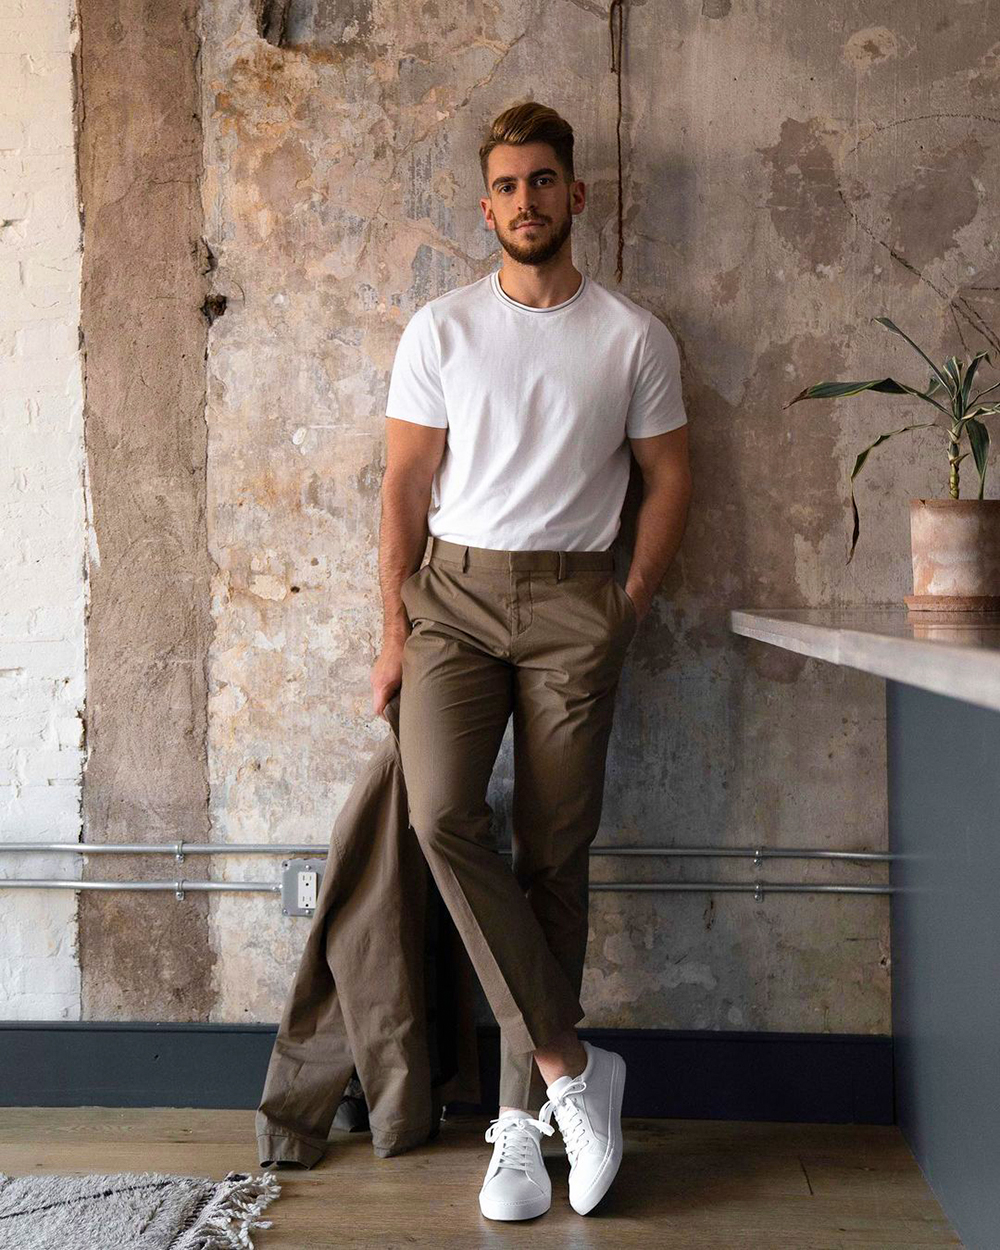 Brown suit, white crew neck t-shirt, and white canvas low-top sneakers outfit